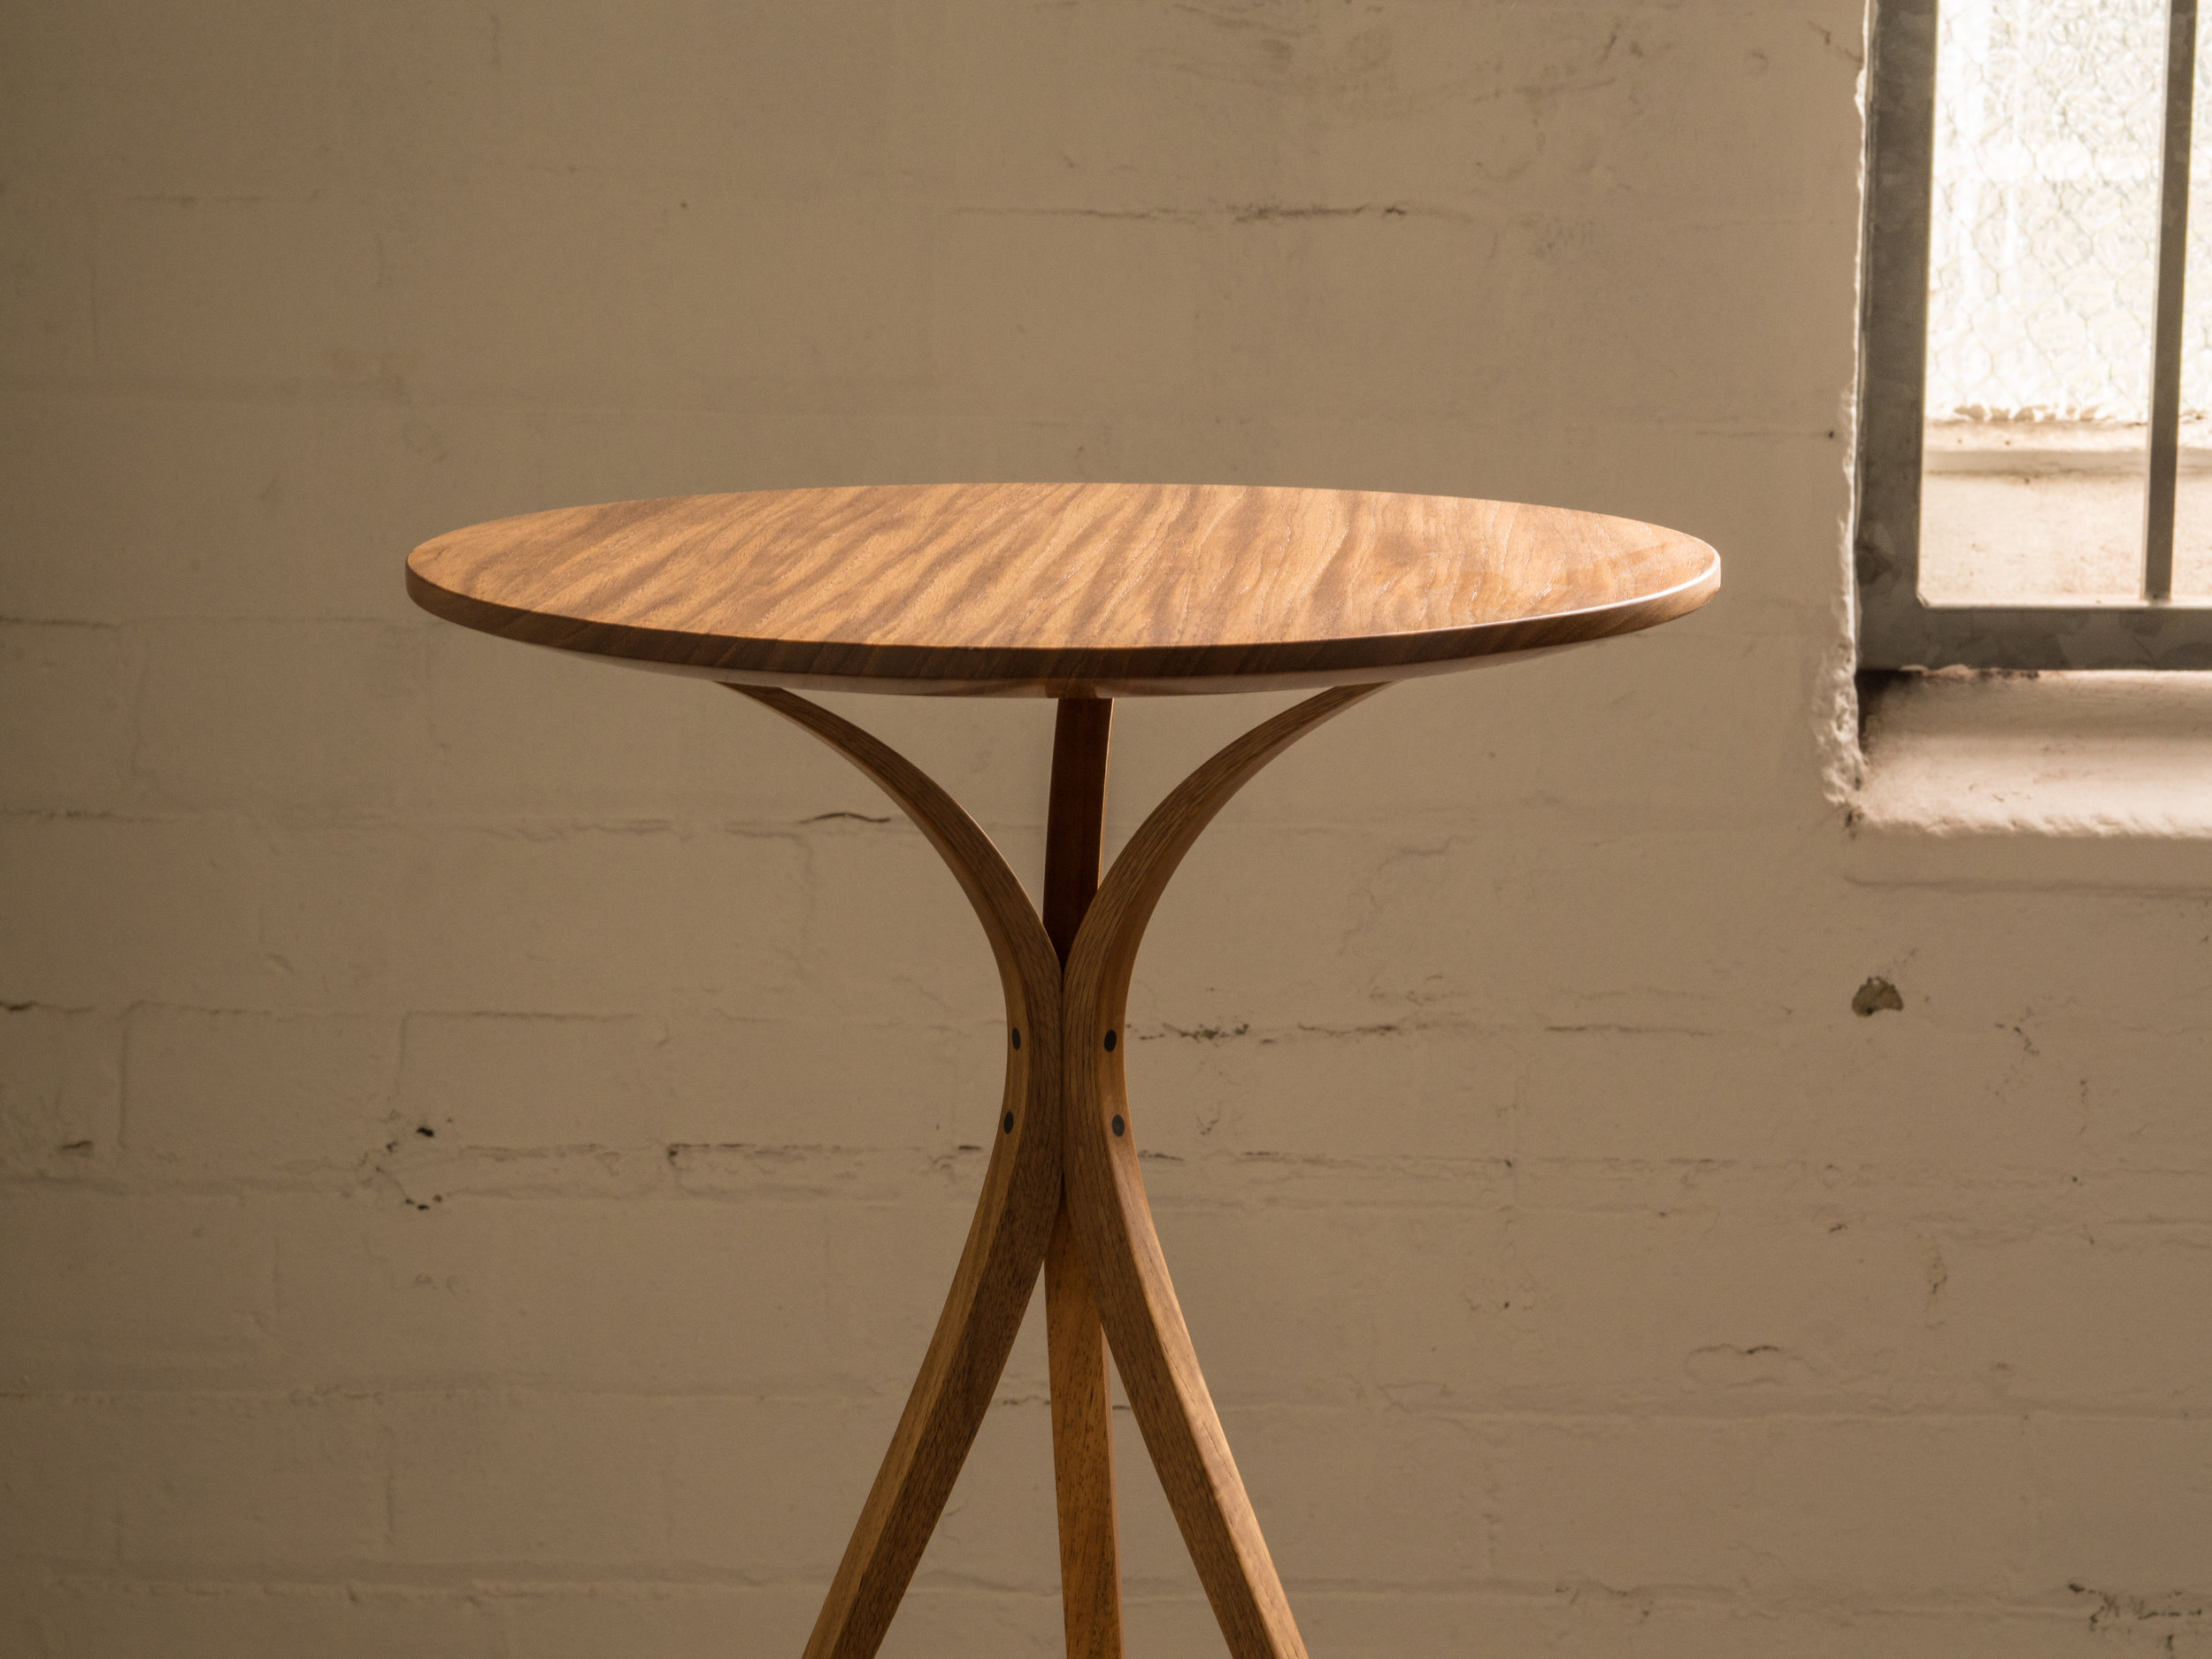 Keith's occassional table with twin tapered laminated legs.